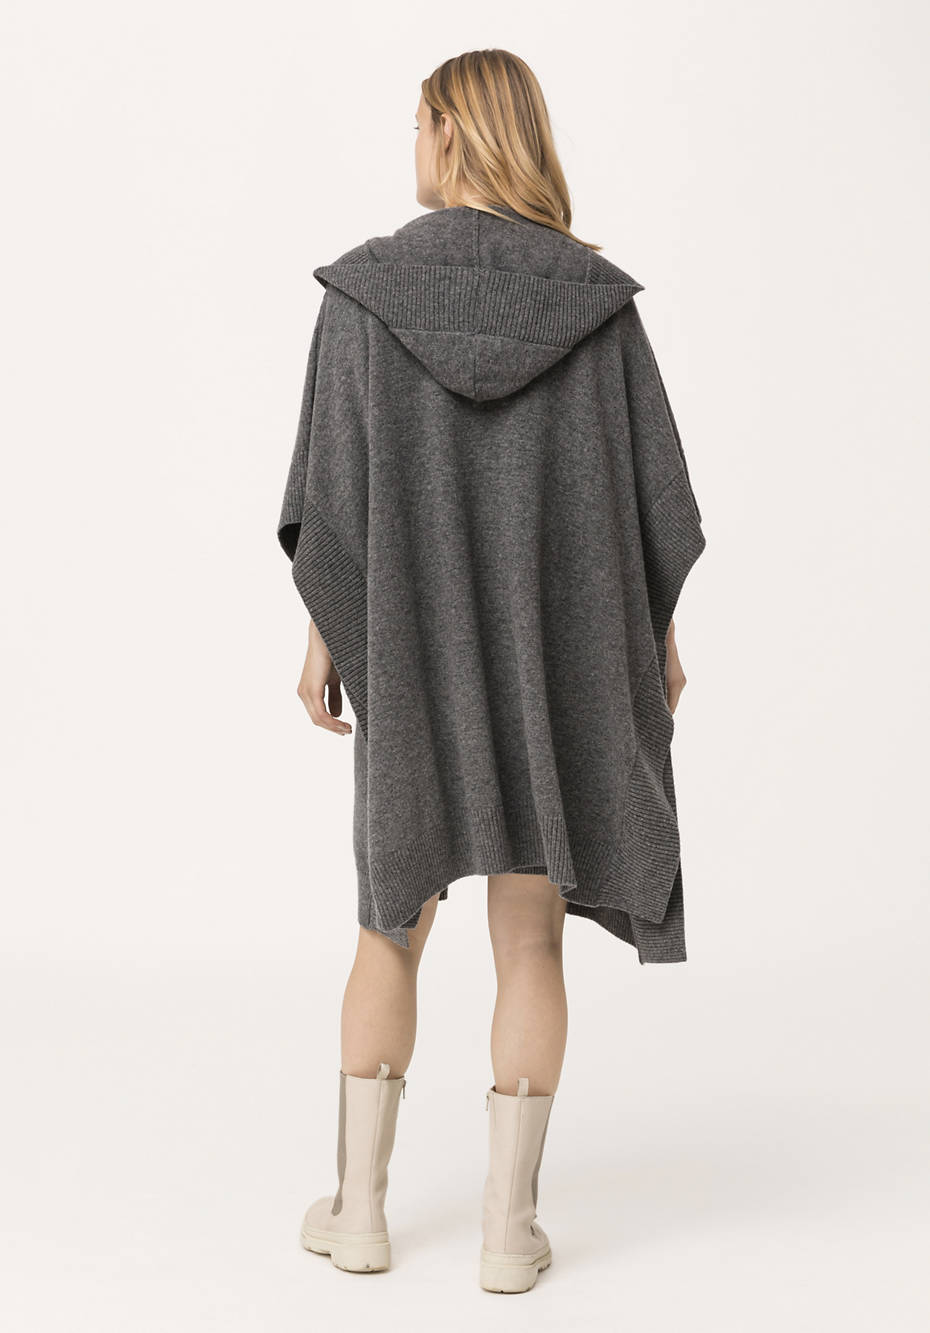 Poncho made from pure organic new wool